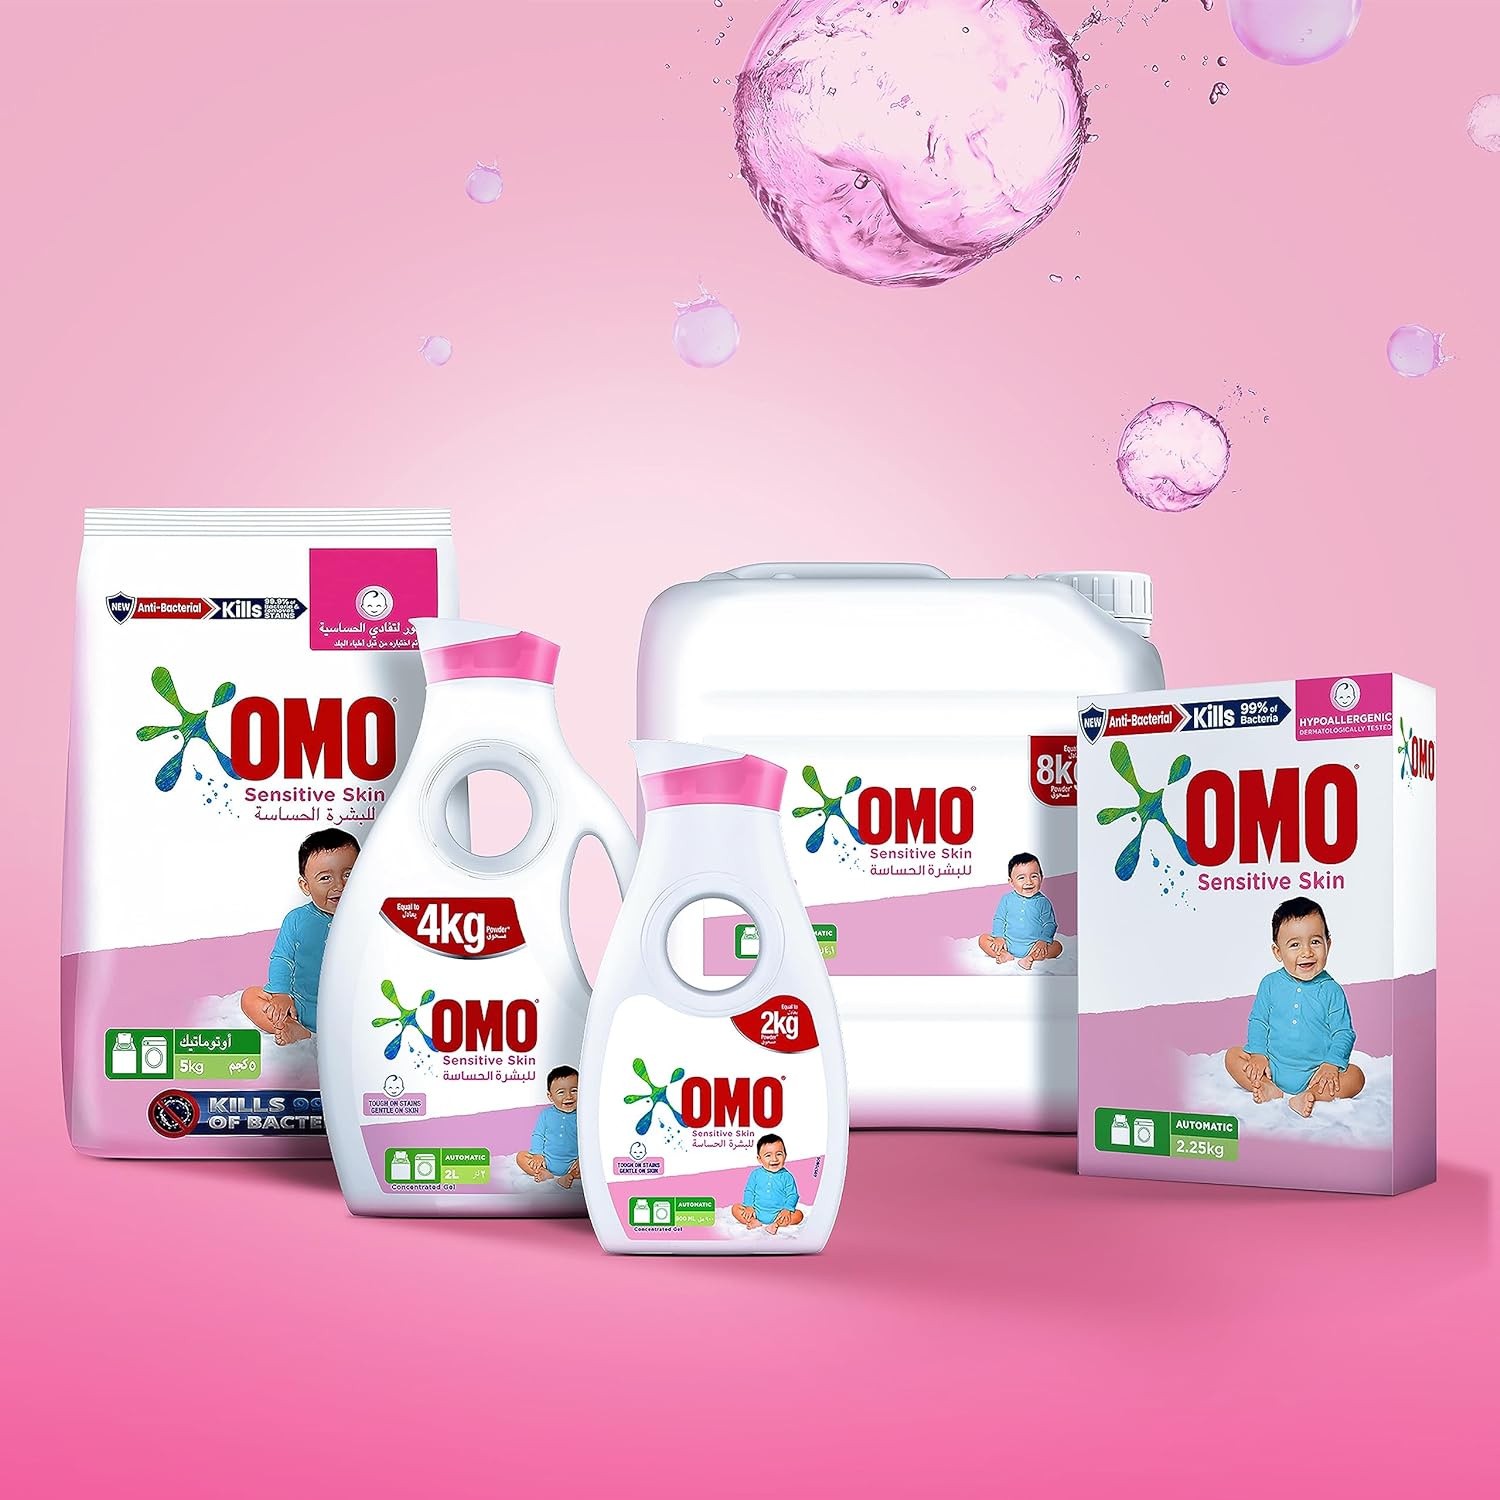 OMO Laundry Detergent Powder, for Top Loading Washing Machines, with a touch of Comfort, to remove tough stains, 5 kg